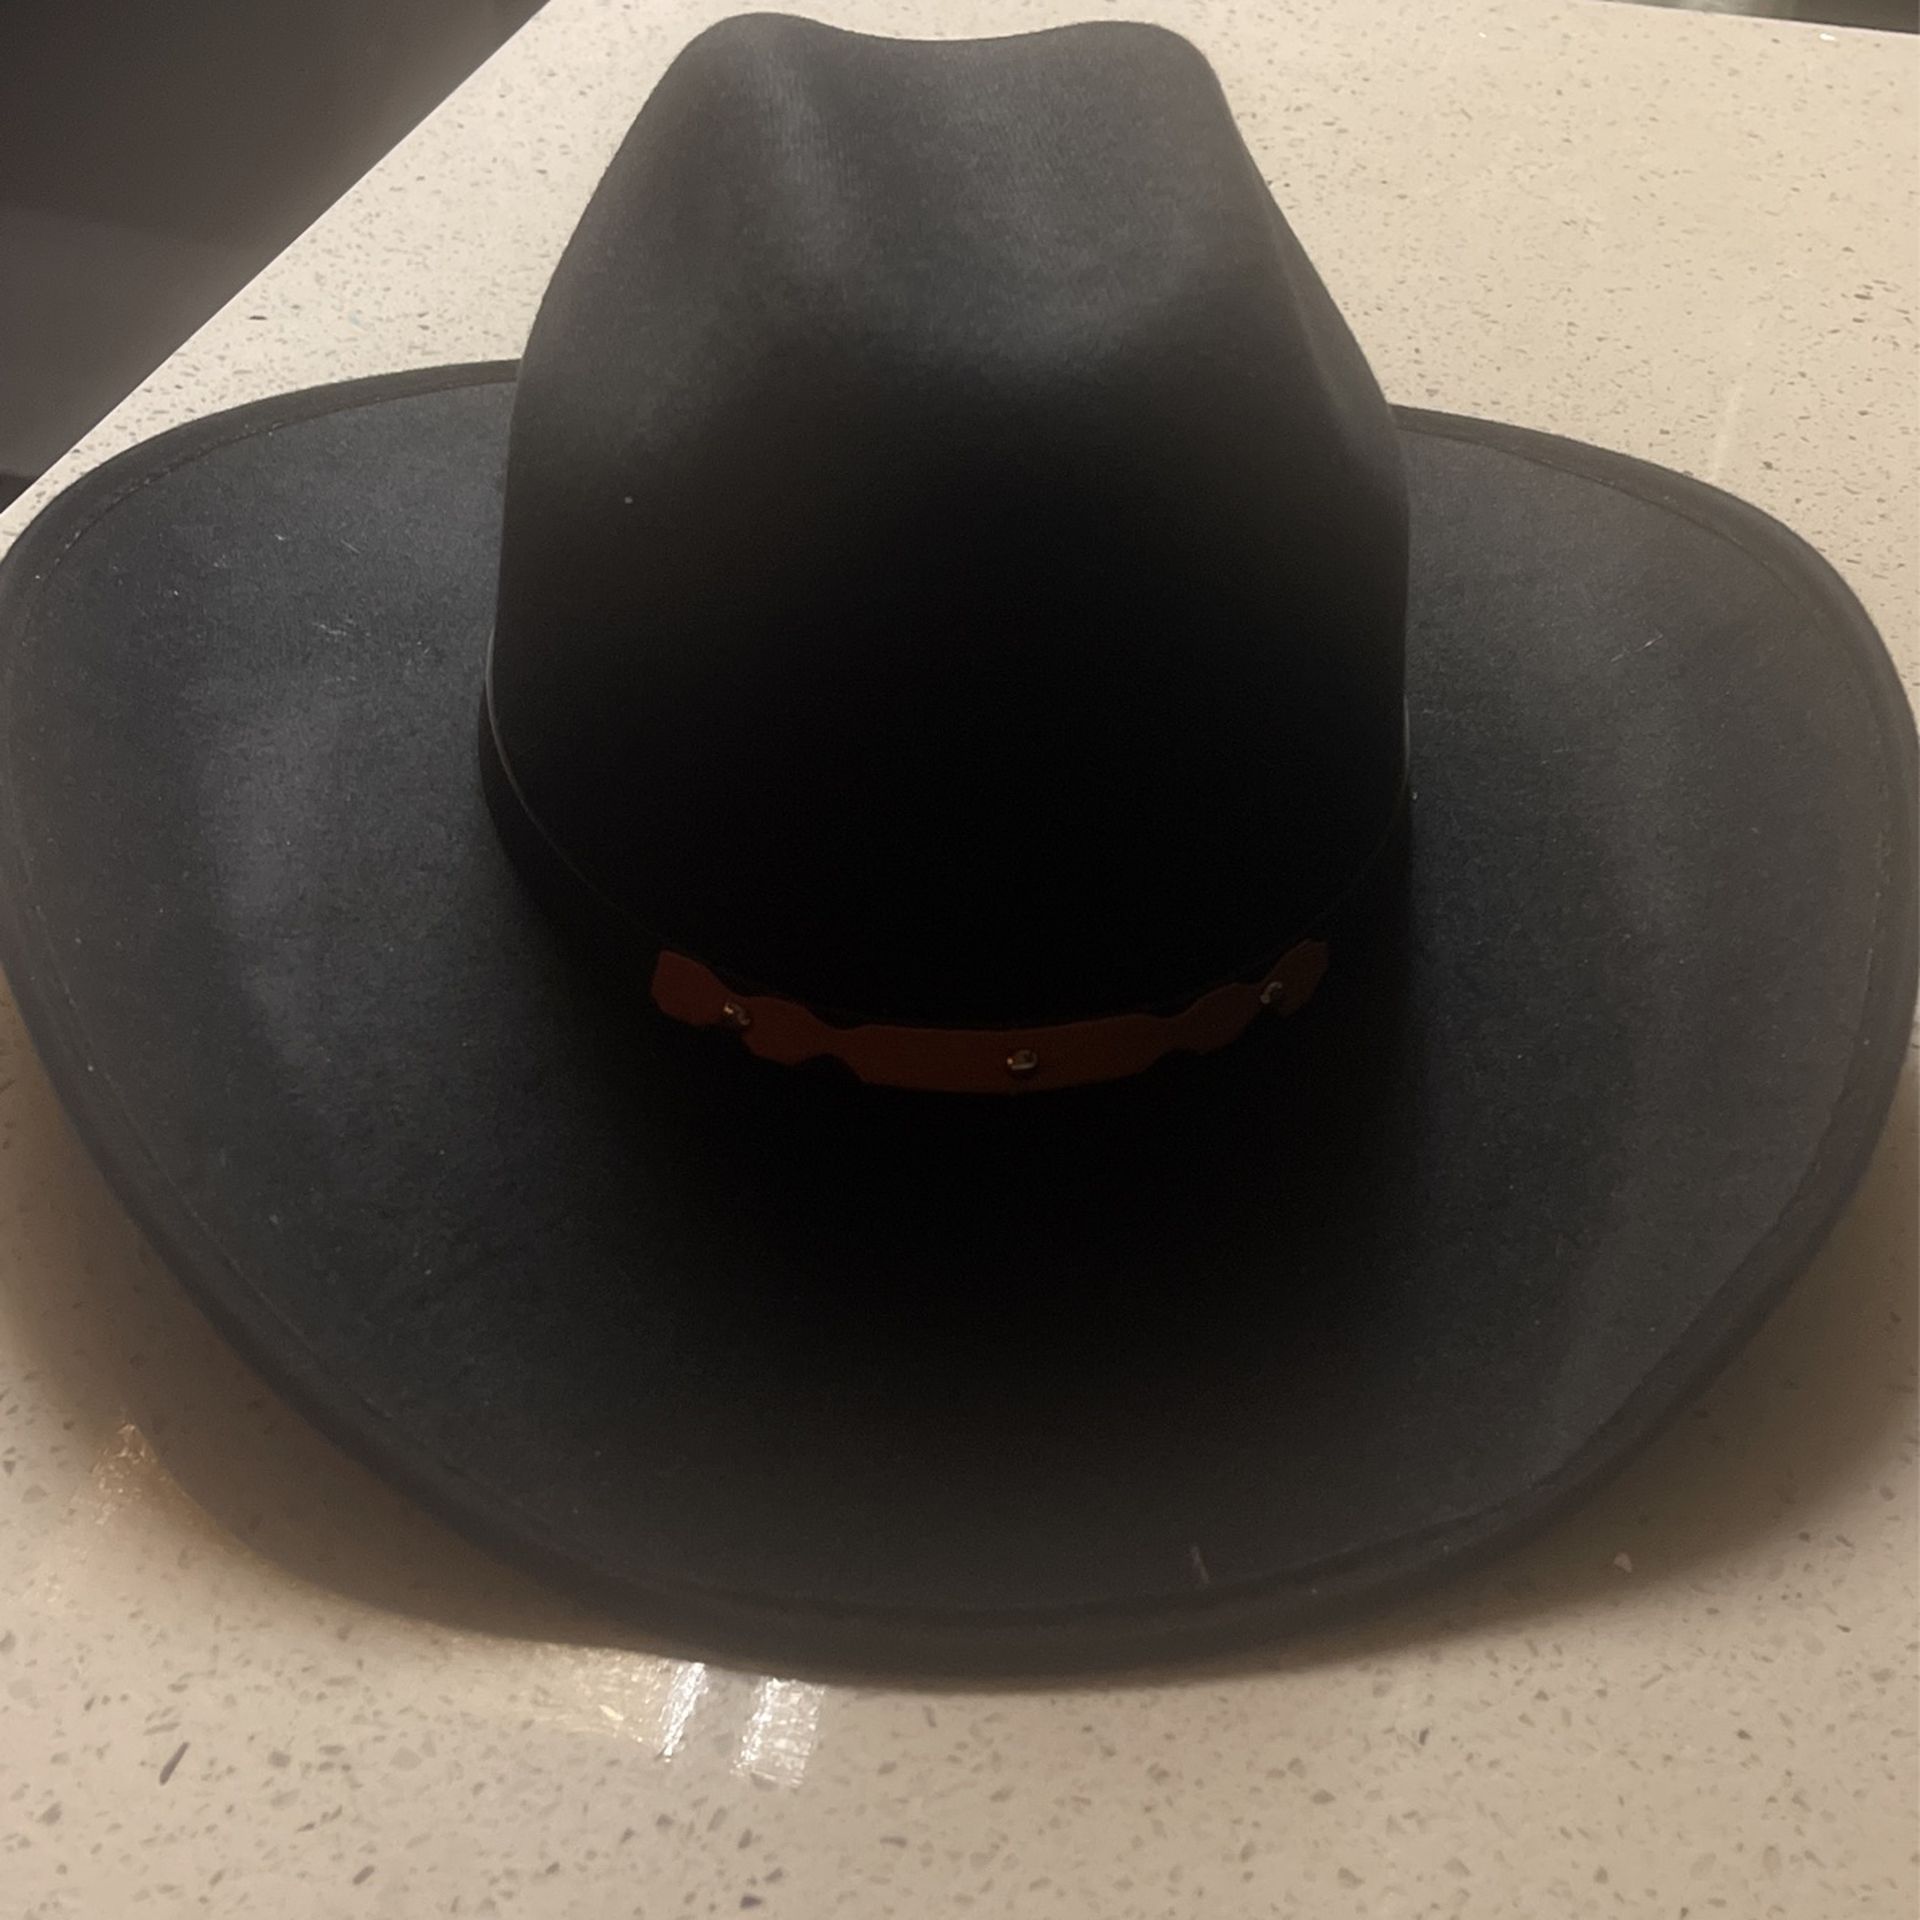 St Louis Cardinals Cowboy Hat for Sale in San Diego, CA - OfferUp